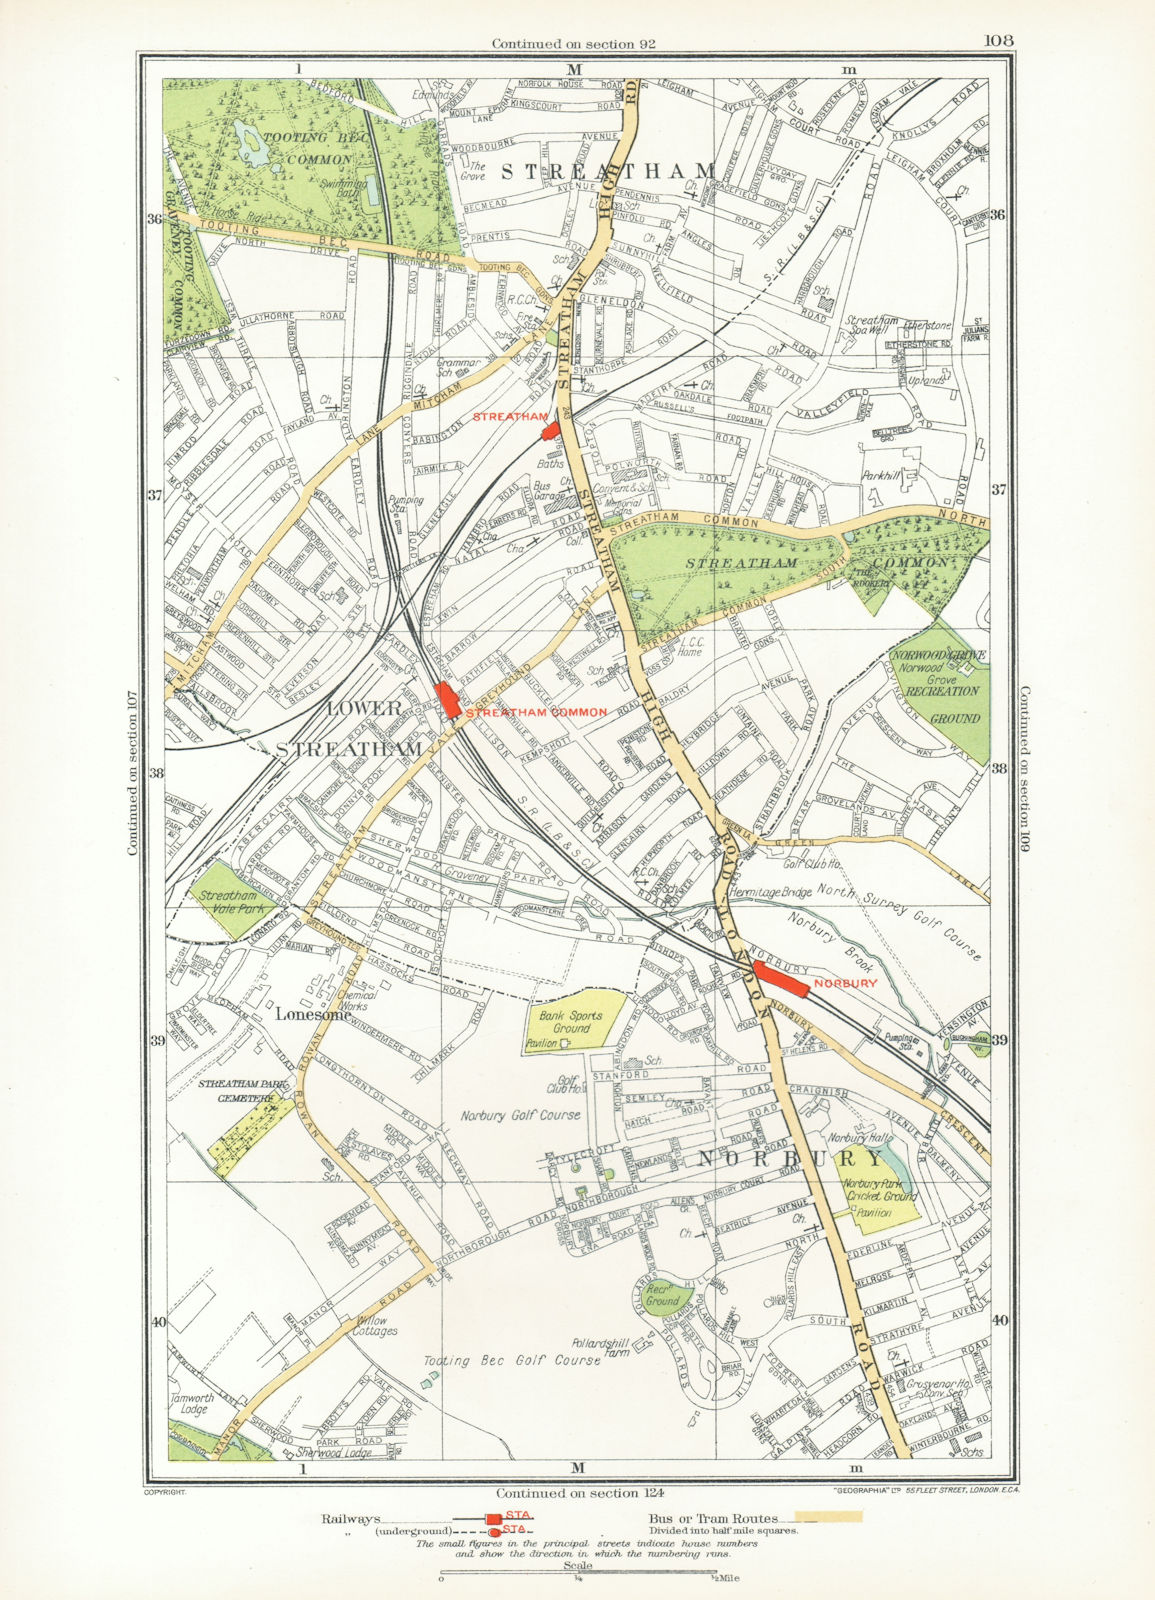 LONDON. Lonesome Lower Streatham Norbury Streatham Common Tooting Bec 1933 map